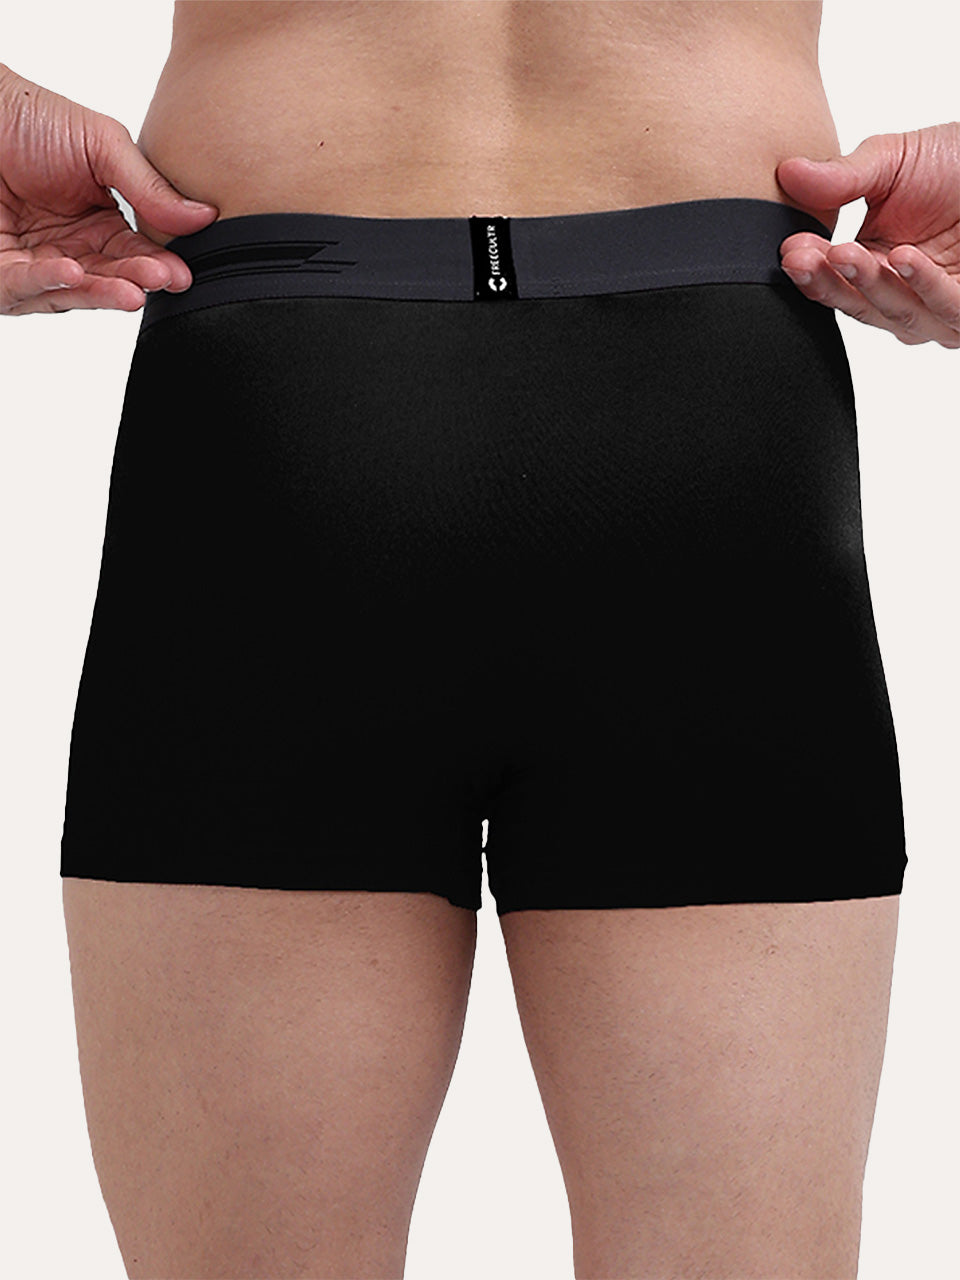 Men's Anti-Bacterial Micro Modal Trunk in Contrast Waistband (Pack of 3)